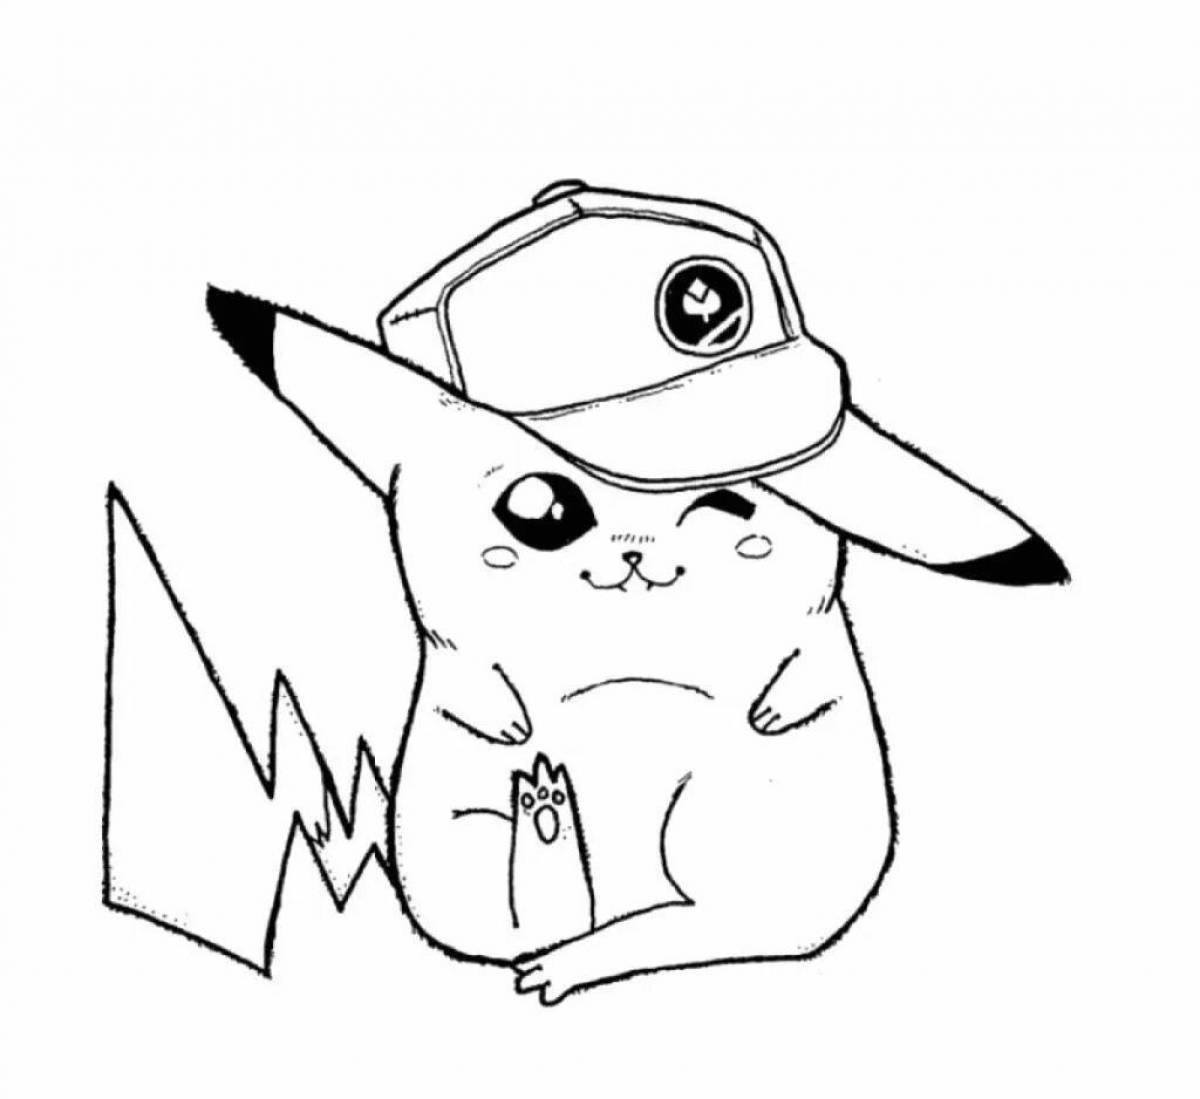 Awesome pikachu coloring book